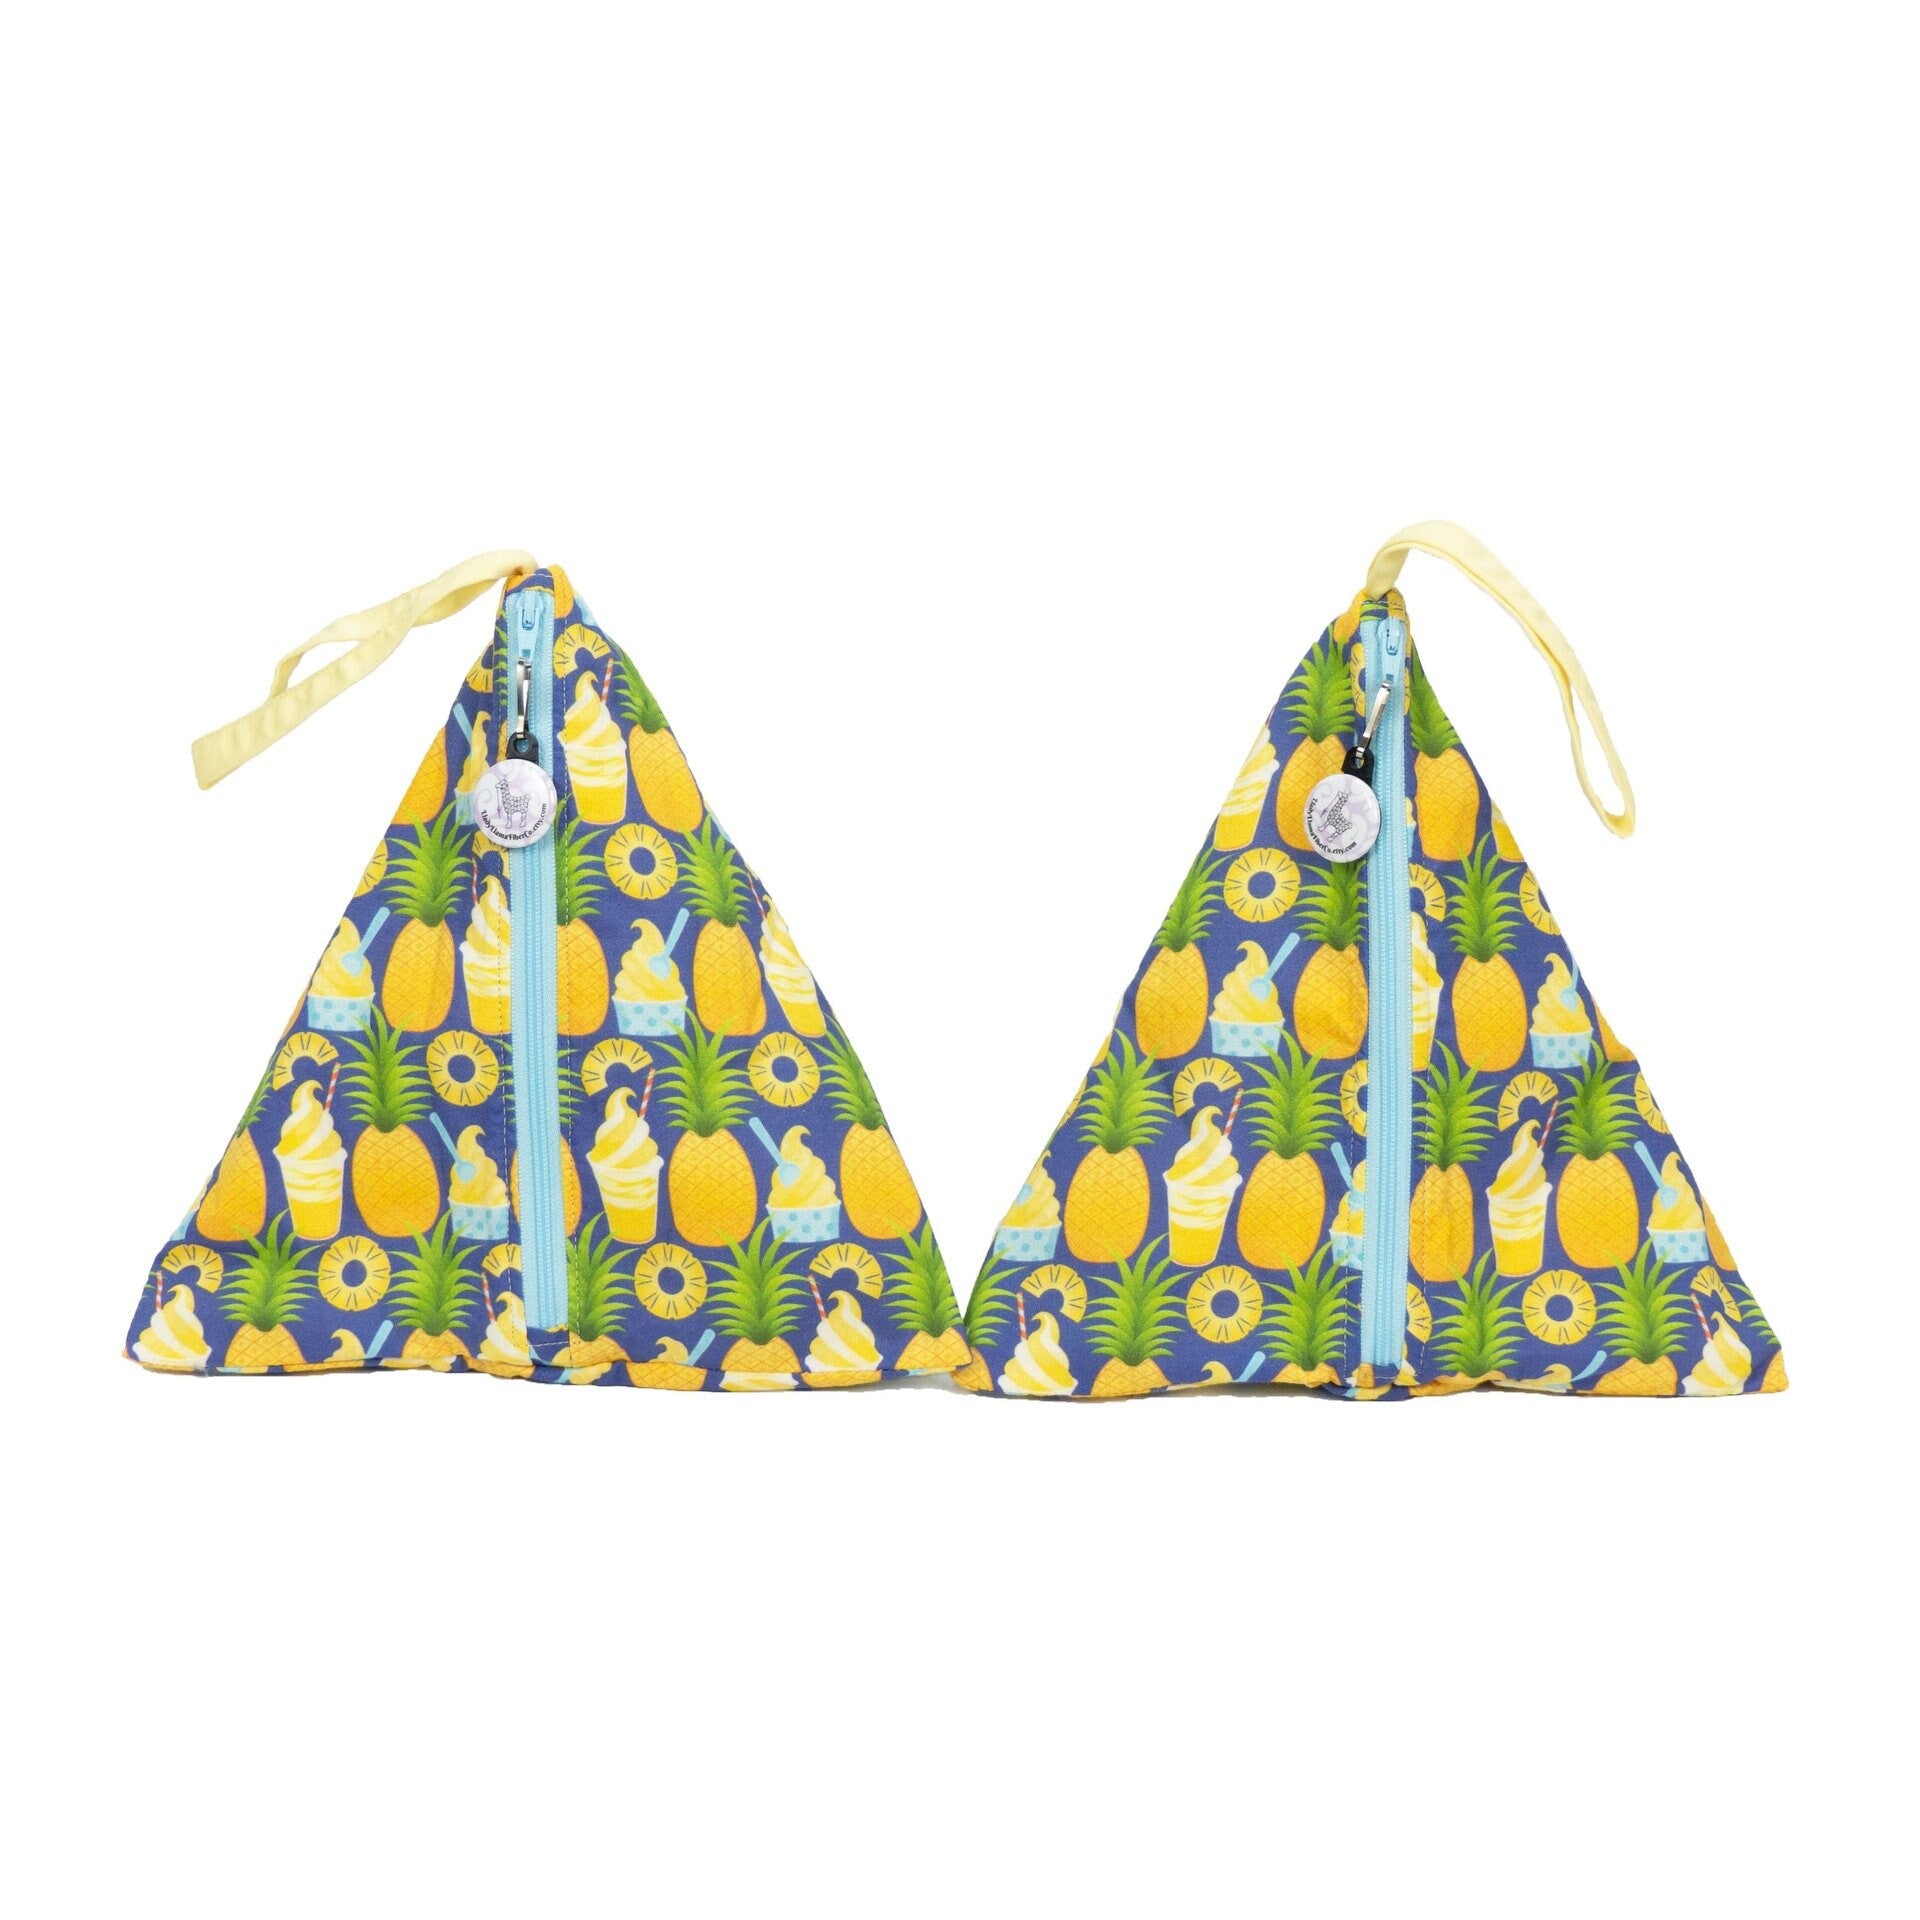 Pineapple Paradise - Llexical Divided Sock Pouch - Knitting, Crochet, Spinning Project Bag